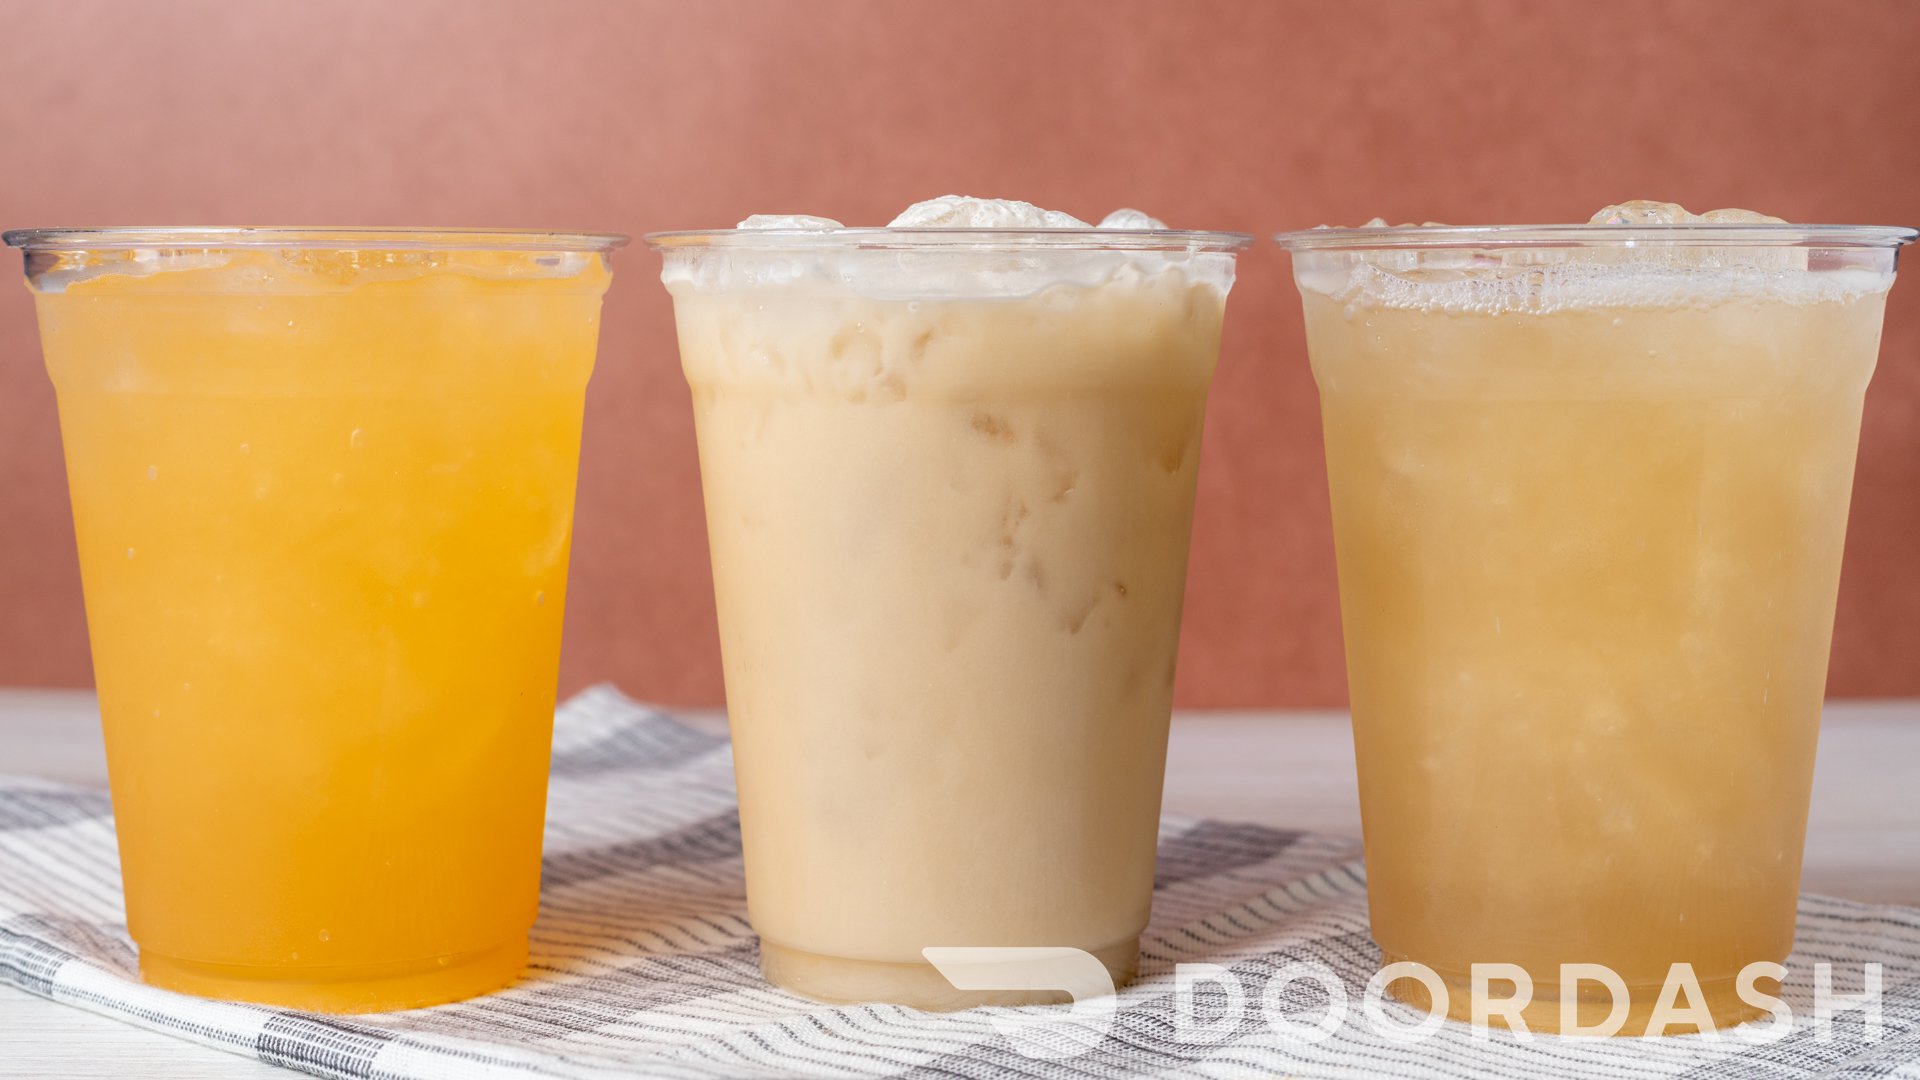 Horchata and other drinks